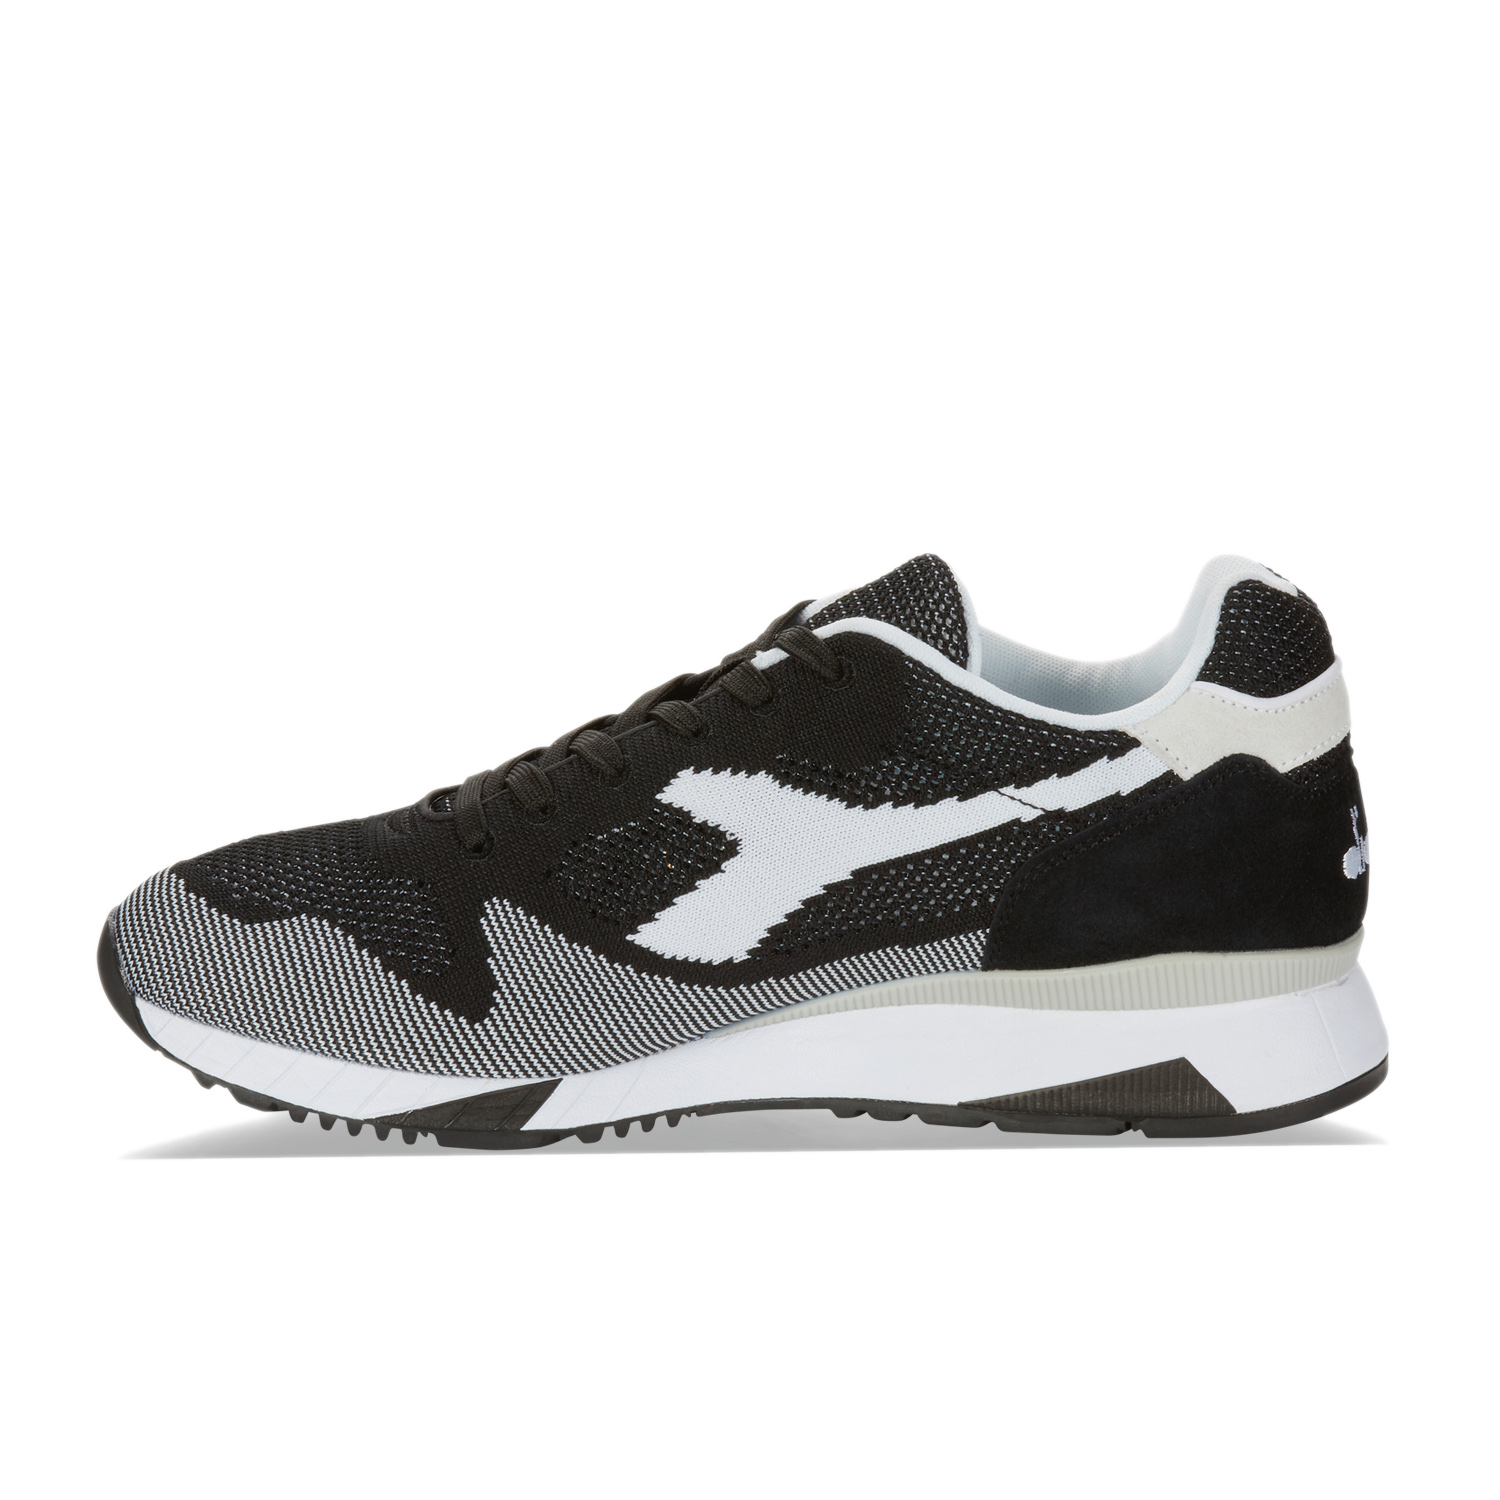 Diadora - Sport shoes V7000 WEAVE for man and woman | eBay